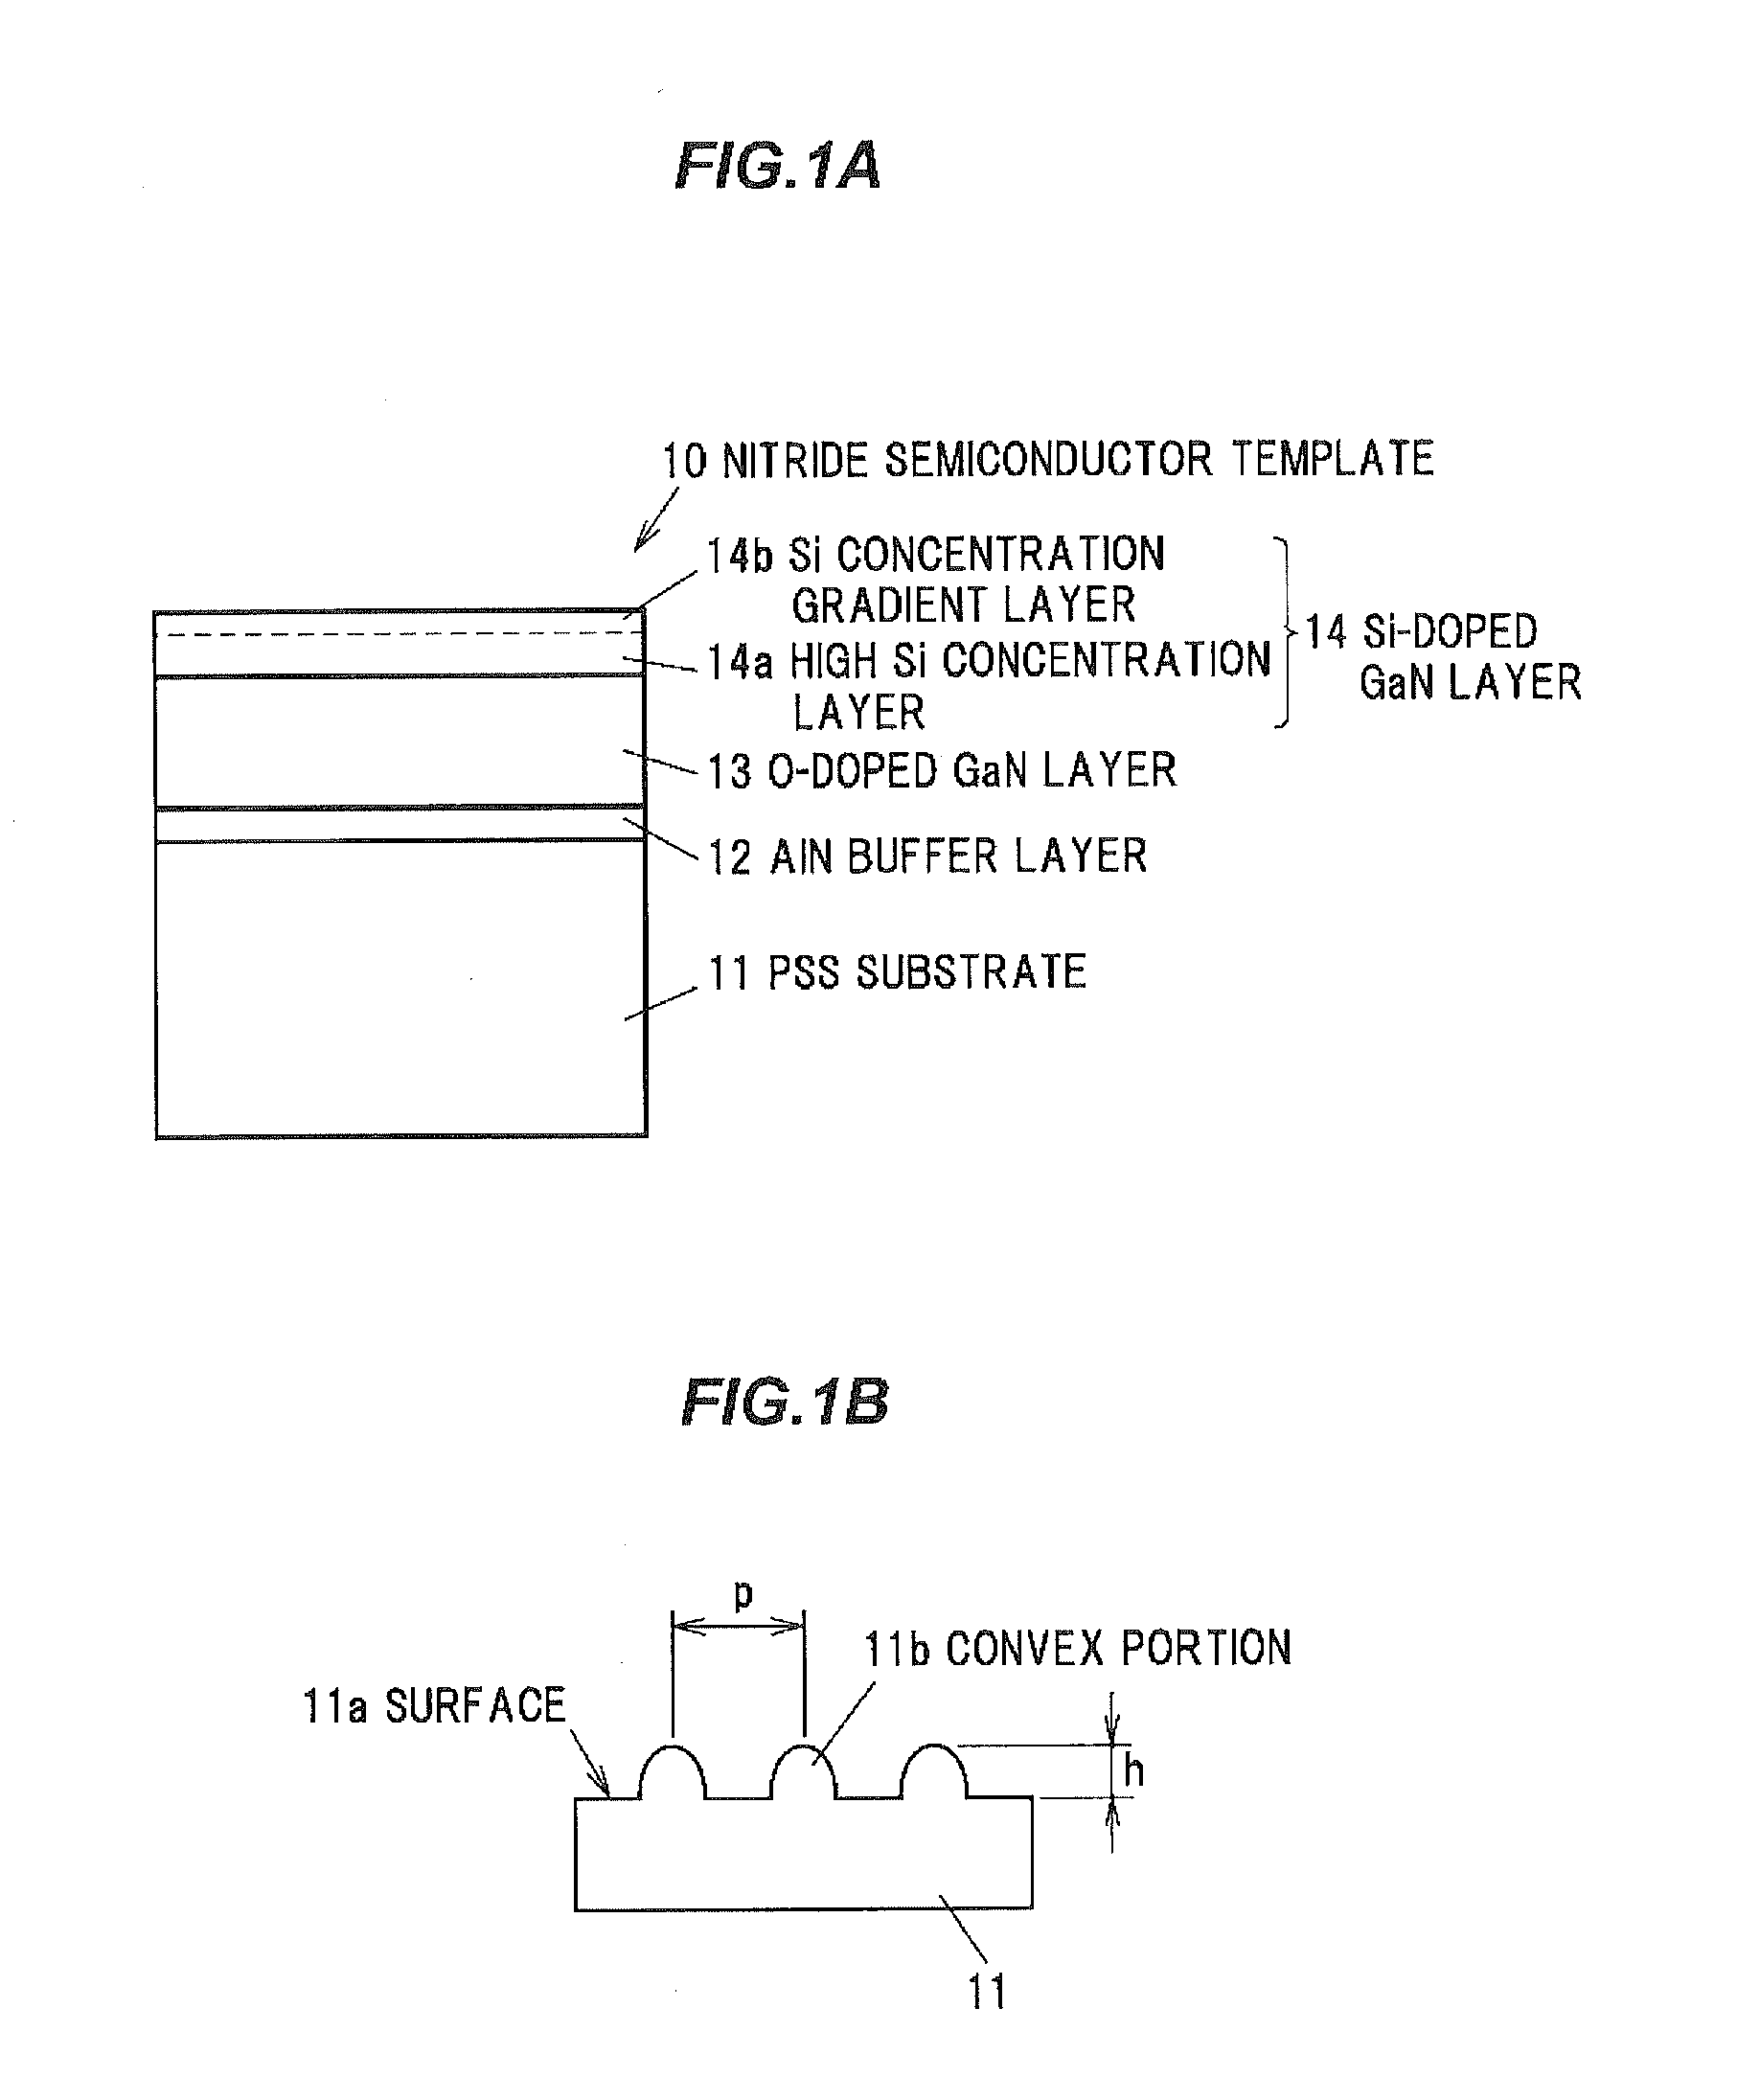 Nitride semiconductor template and light-emitting diode